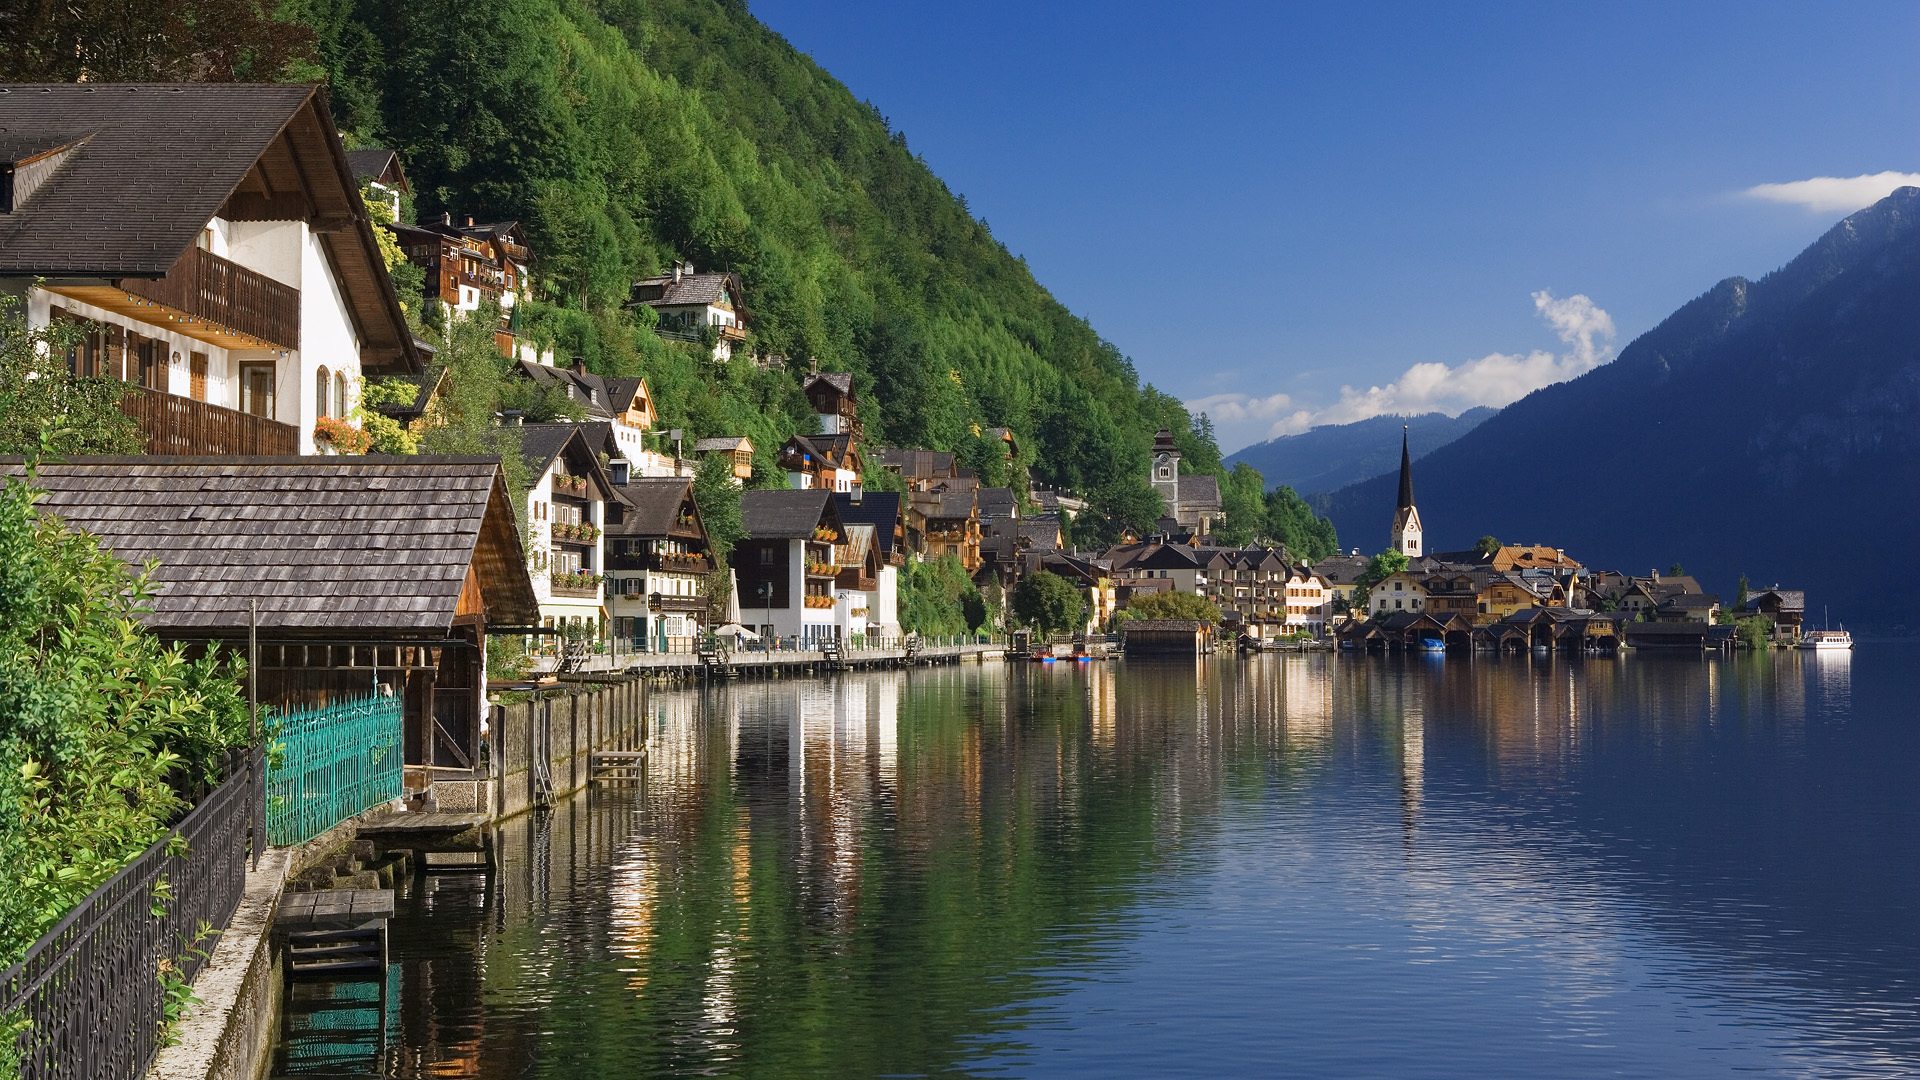 Bad Goisern am Hallstättersee: A scenic market town in Upper Austria, near Hallstatt. Capture the picturesque beauty and charm.